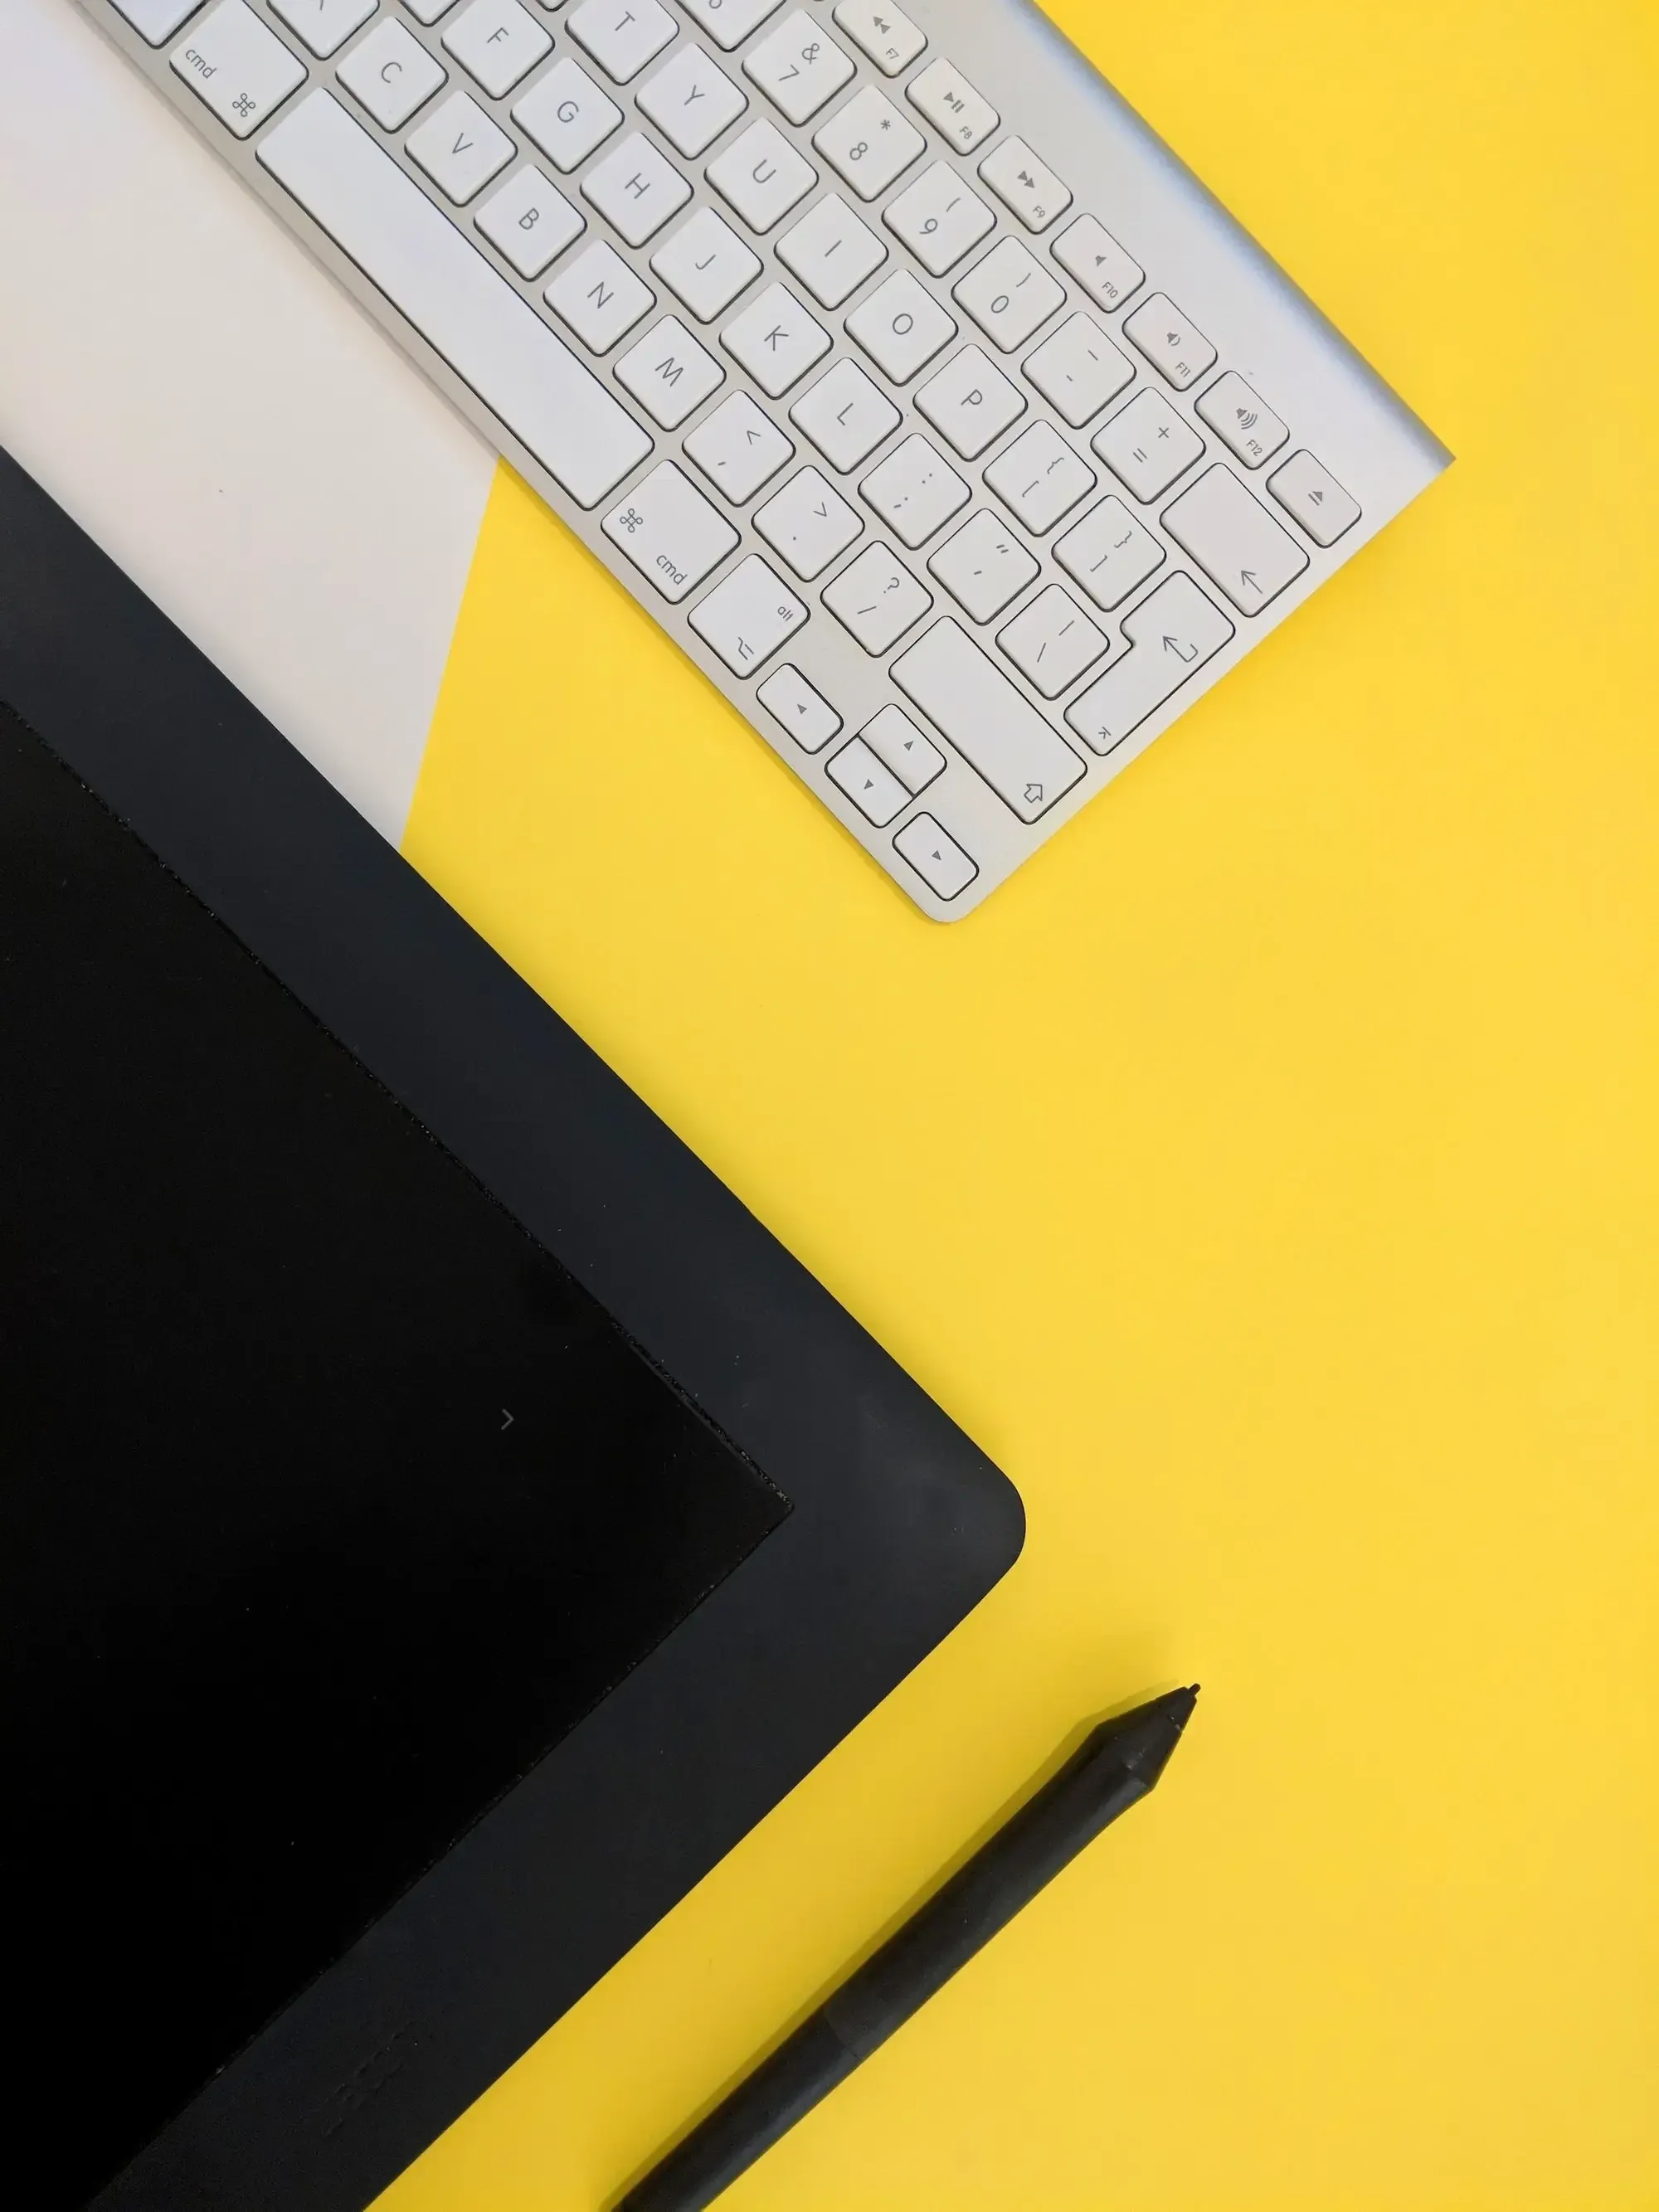 Black tablet, black pen and white keyboard on yellow background. 